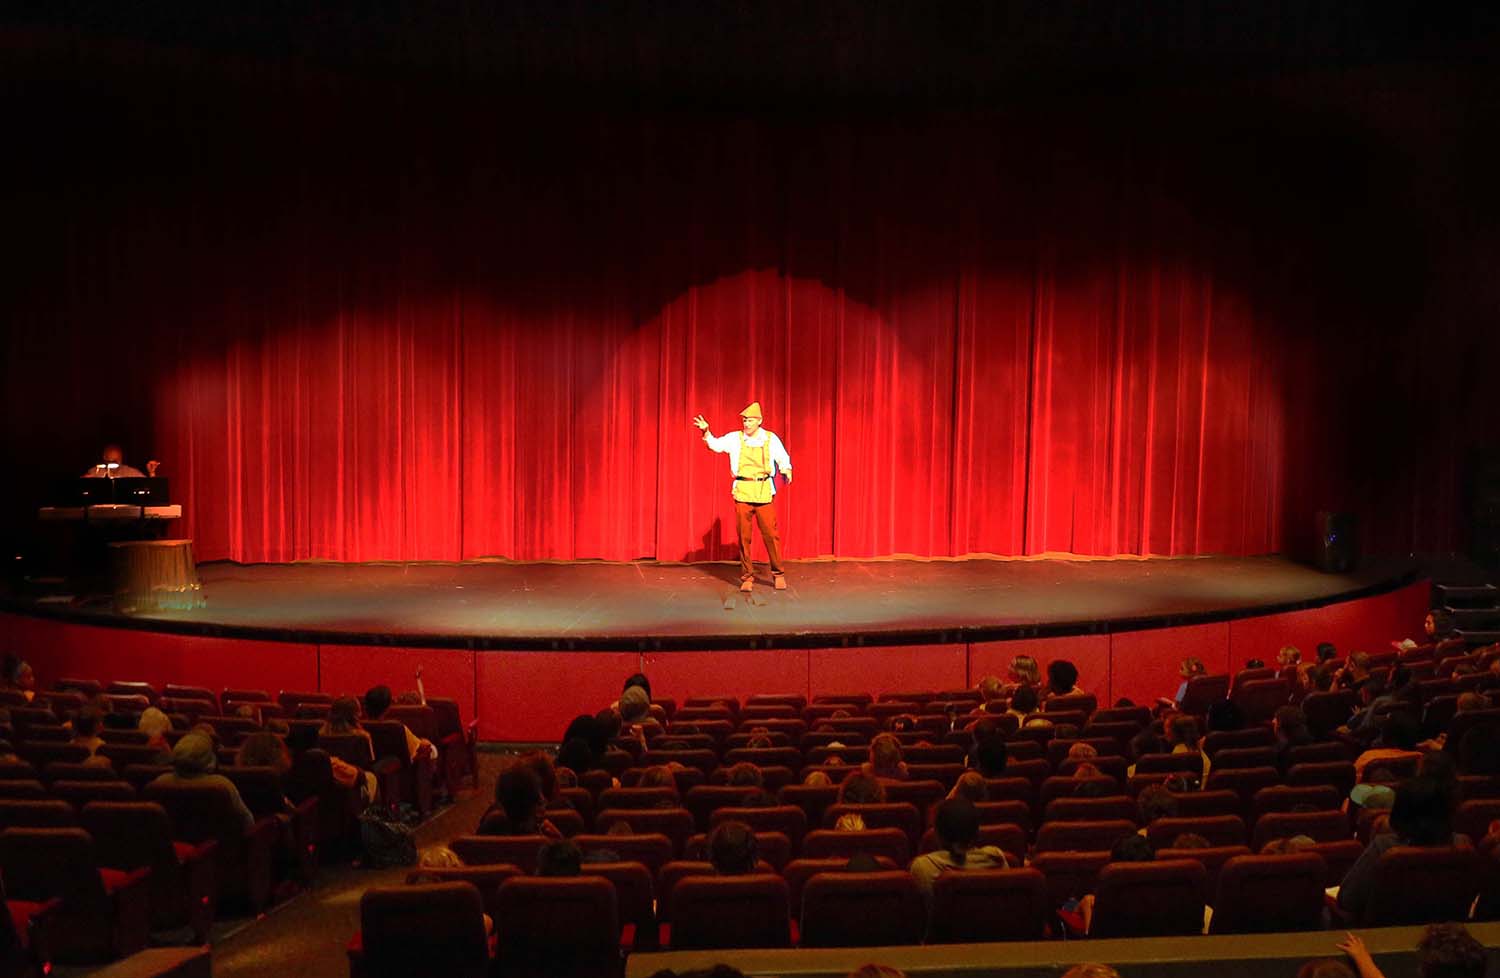 an actor on stage with red curtains behind him, speaking to a full house